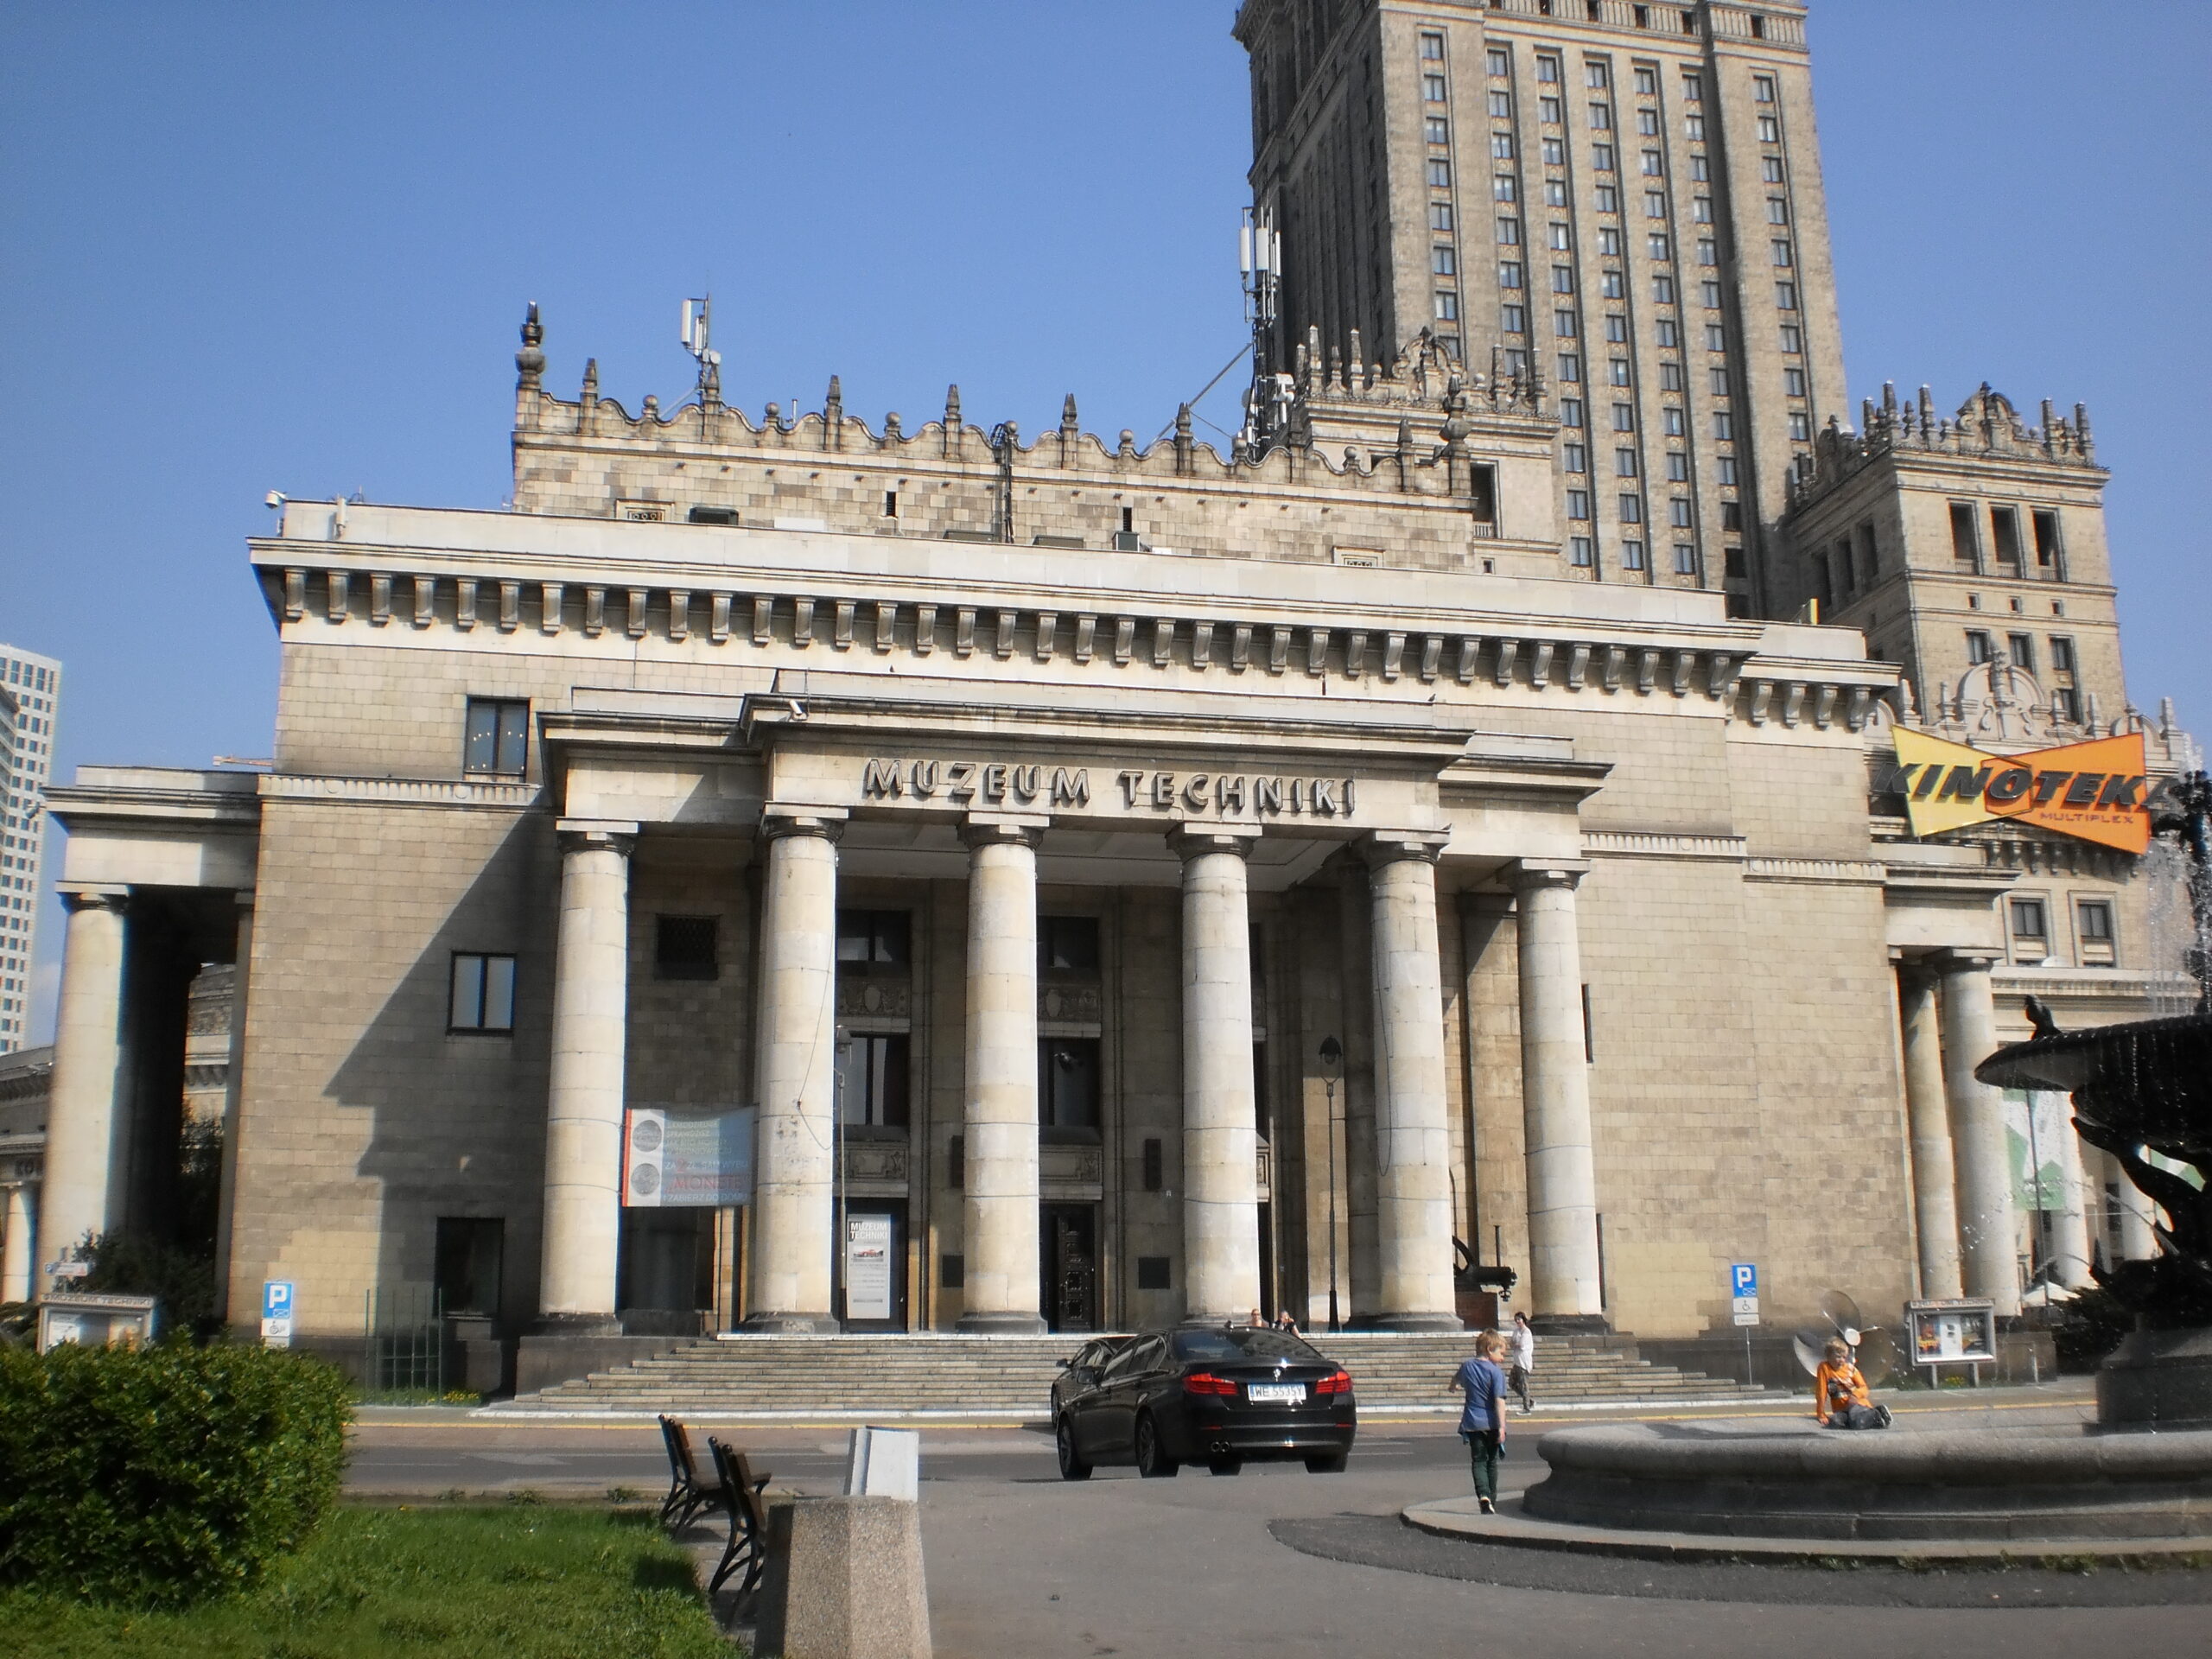 The Museum of the City of Warsaw